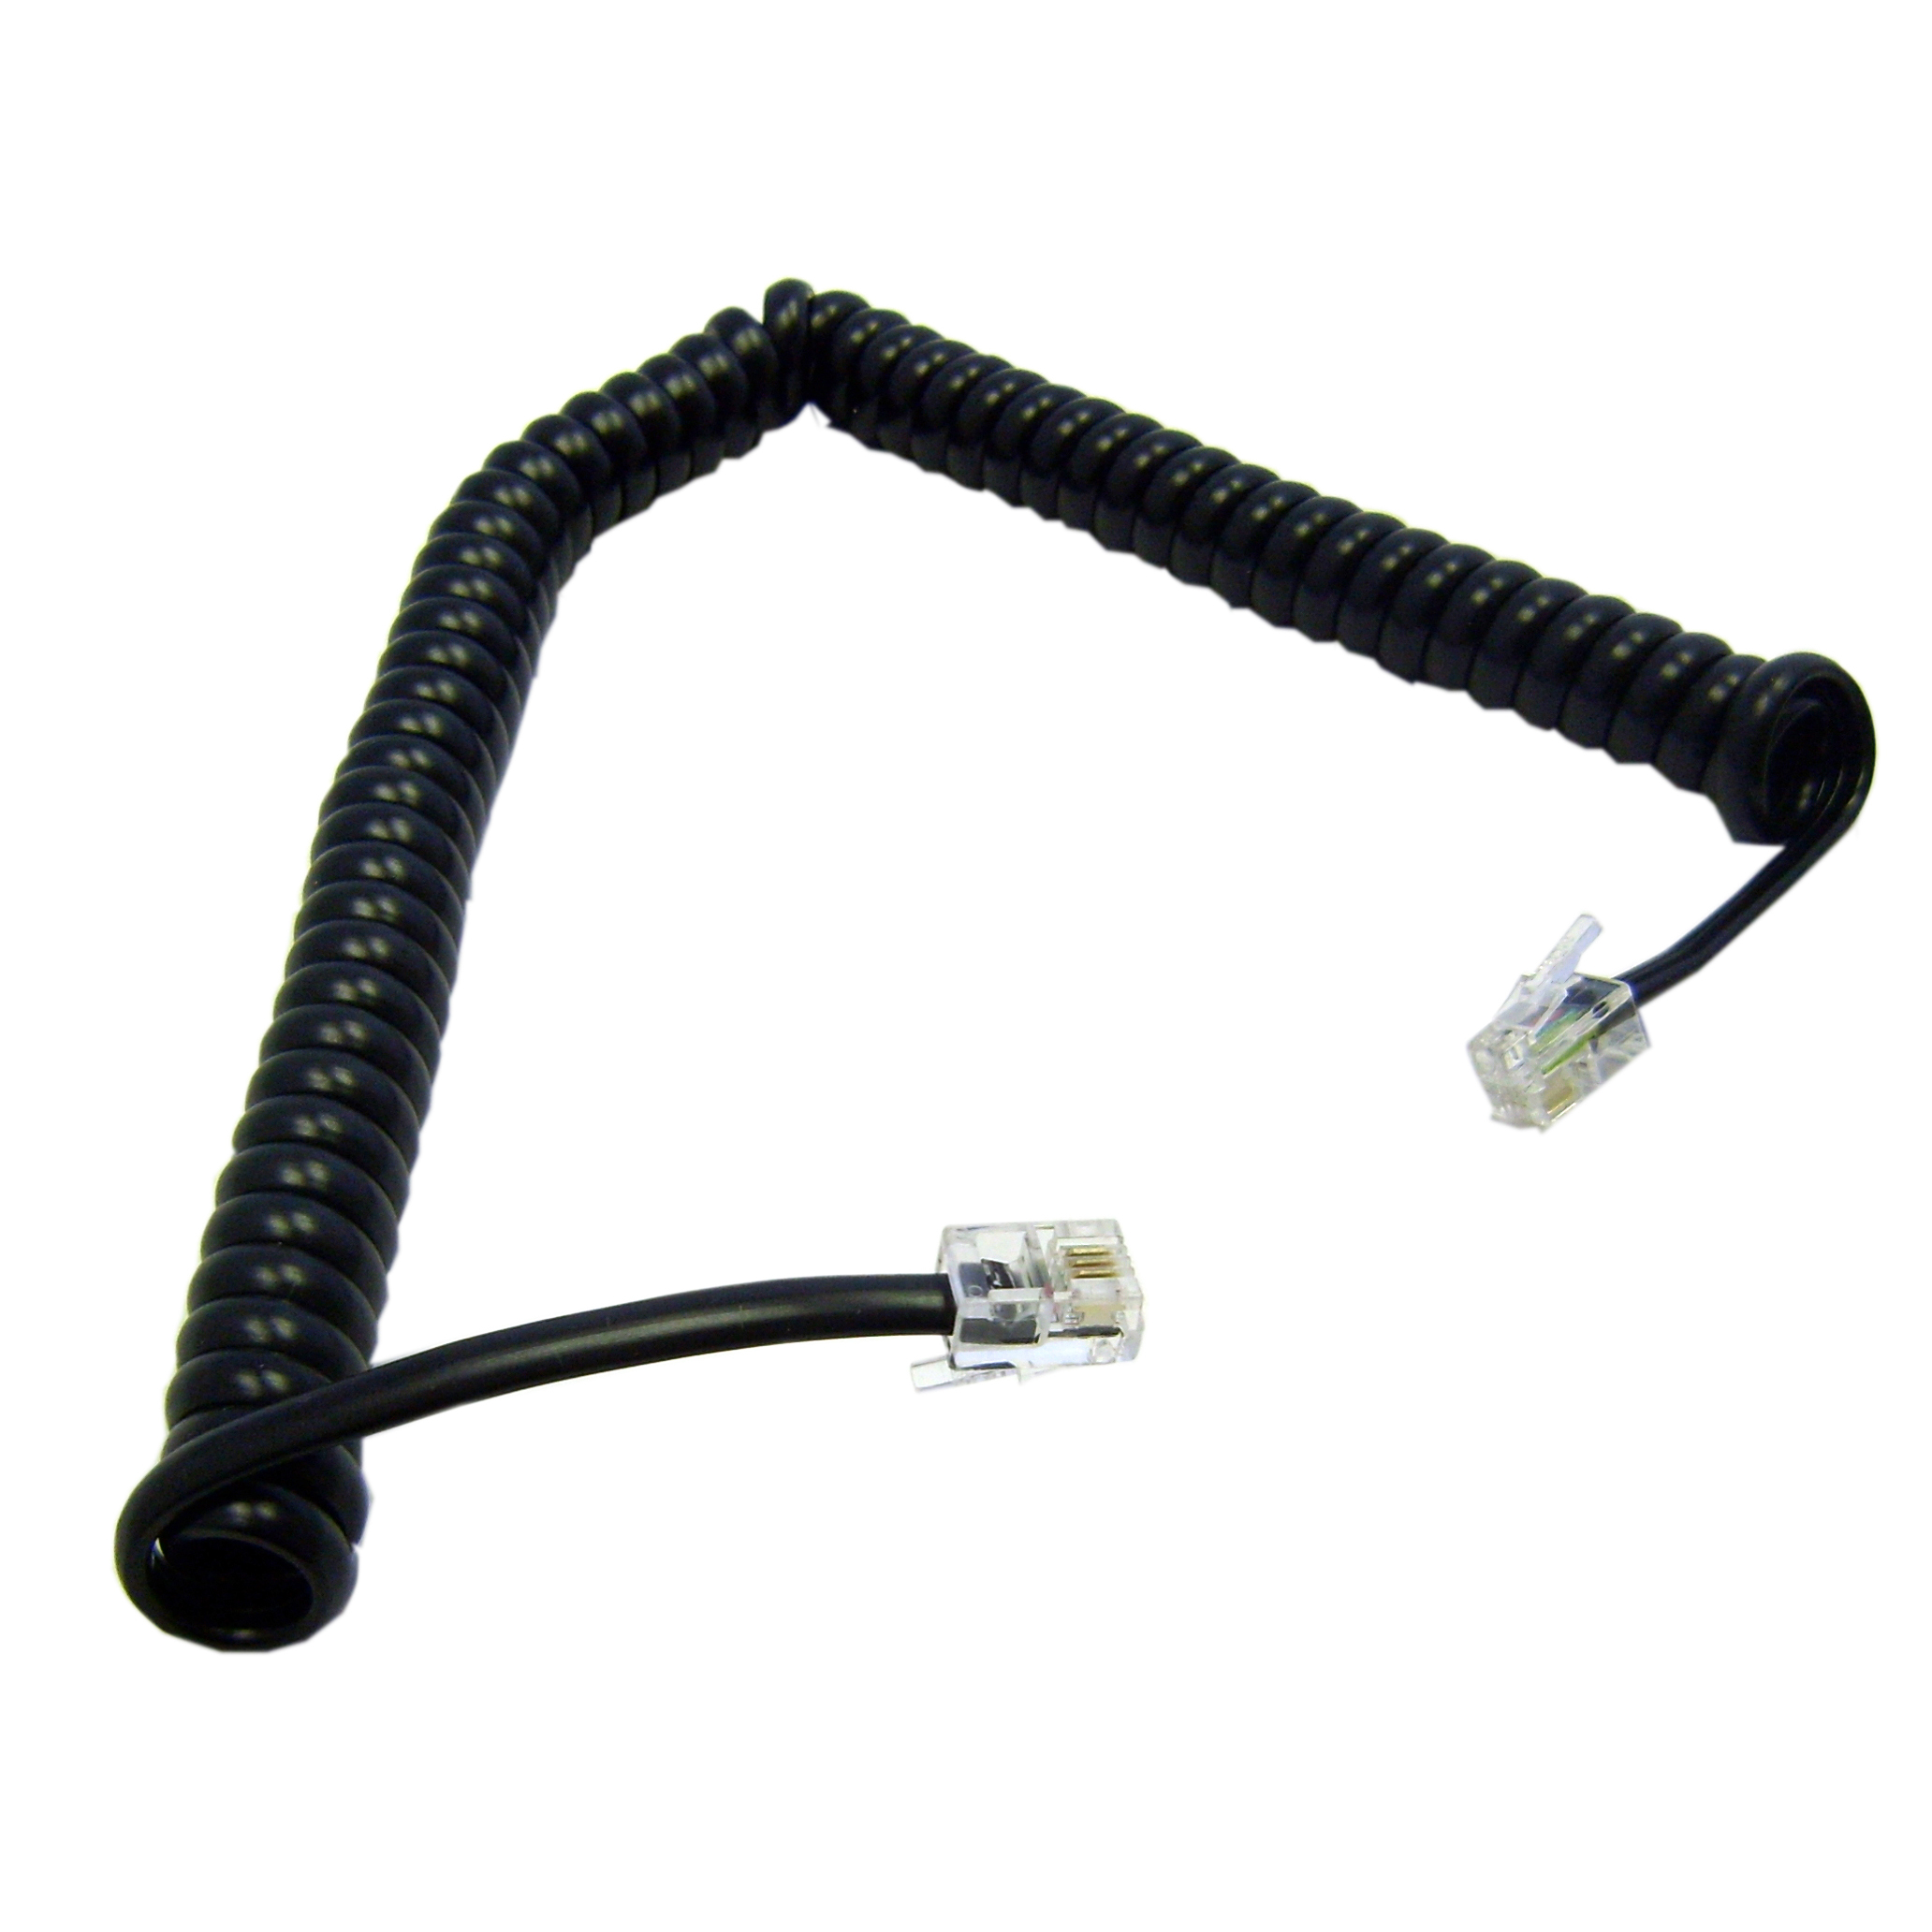 RJ 10 Telephone Replacement Cable Phone Lead Coiled Handset Wire BLACK 2m 3m 5m 